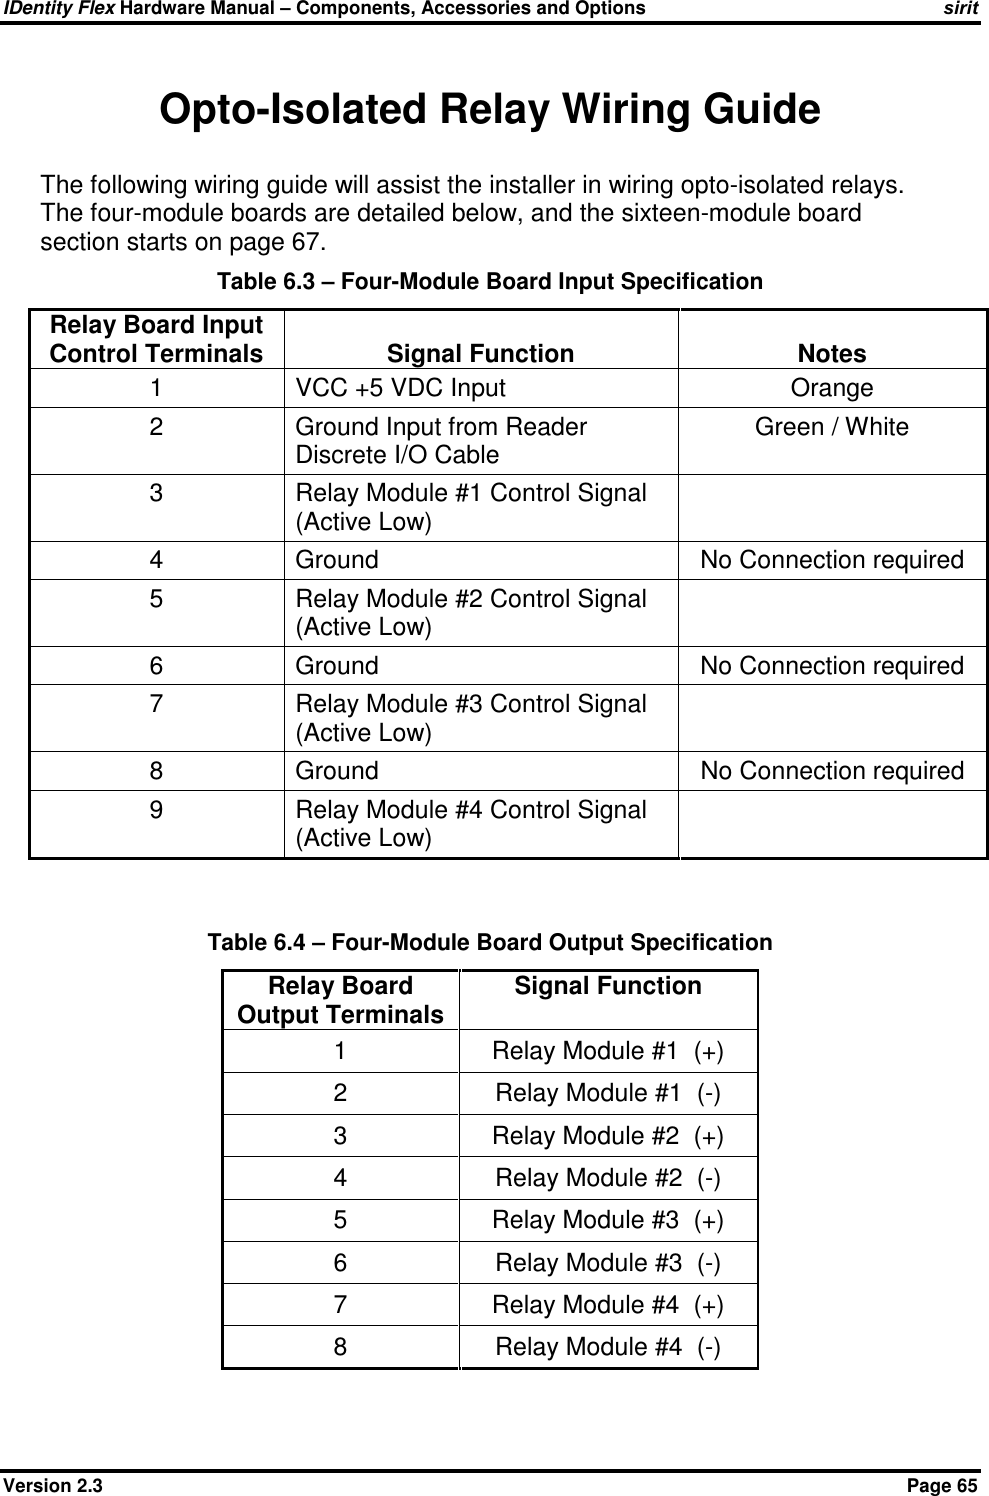 IDentity Flex Hardware Manual – Components, Accessories and Options sirit Version 2.3    Page 65 Opto-Isolated Relay Wiring Guide The following wiring guide will assist the installer in wiring opto-isolated relays.  The four-module boards are detailed below, and the sixteen-module board section starts on page 67. Table 6.3 – Four-Module Board Input Specification Relay Board Input Control Terminals  Signal Function  Notes 1  VCC +5 VDC Input  Orange 2  Ground Input from Reader Discrete I/O Cable Green / White 3  Relay Module #1 Control Signal (Active Low)  4  Ground  No Connection required 5  Relay Module #2 Control Signal (Active Low)  6  Ground  No Connection required 7  Relay Module #3 Control Signal (Active Low)  8  Ground   No Connection required 9  Relay Module #4 Control Signal (Active Low)    Table 6.4 – Four-Module Board Output Specification Relay Board Output Terminals Signal Function 1  Relay Module #1  (+) 2  Relay Module #1  (-) 3  Relay Module #2  (+) 4  Relay Module #2  (-) 5  Relay Module #3  (+) 6  Relay Module #3  (-) 7  Relay Module #4  (+) 8  Relay Module #4  (-)  